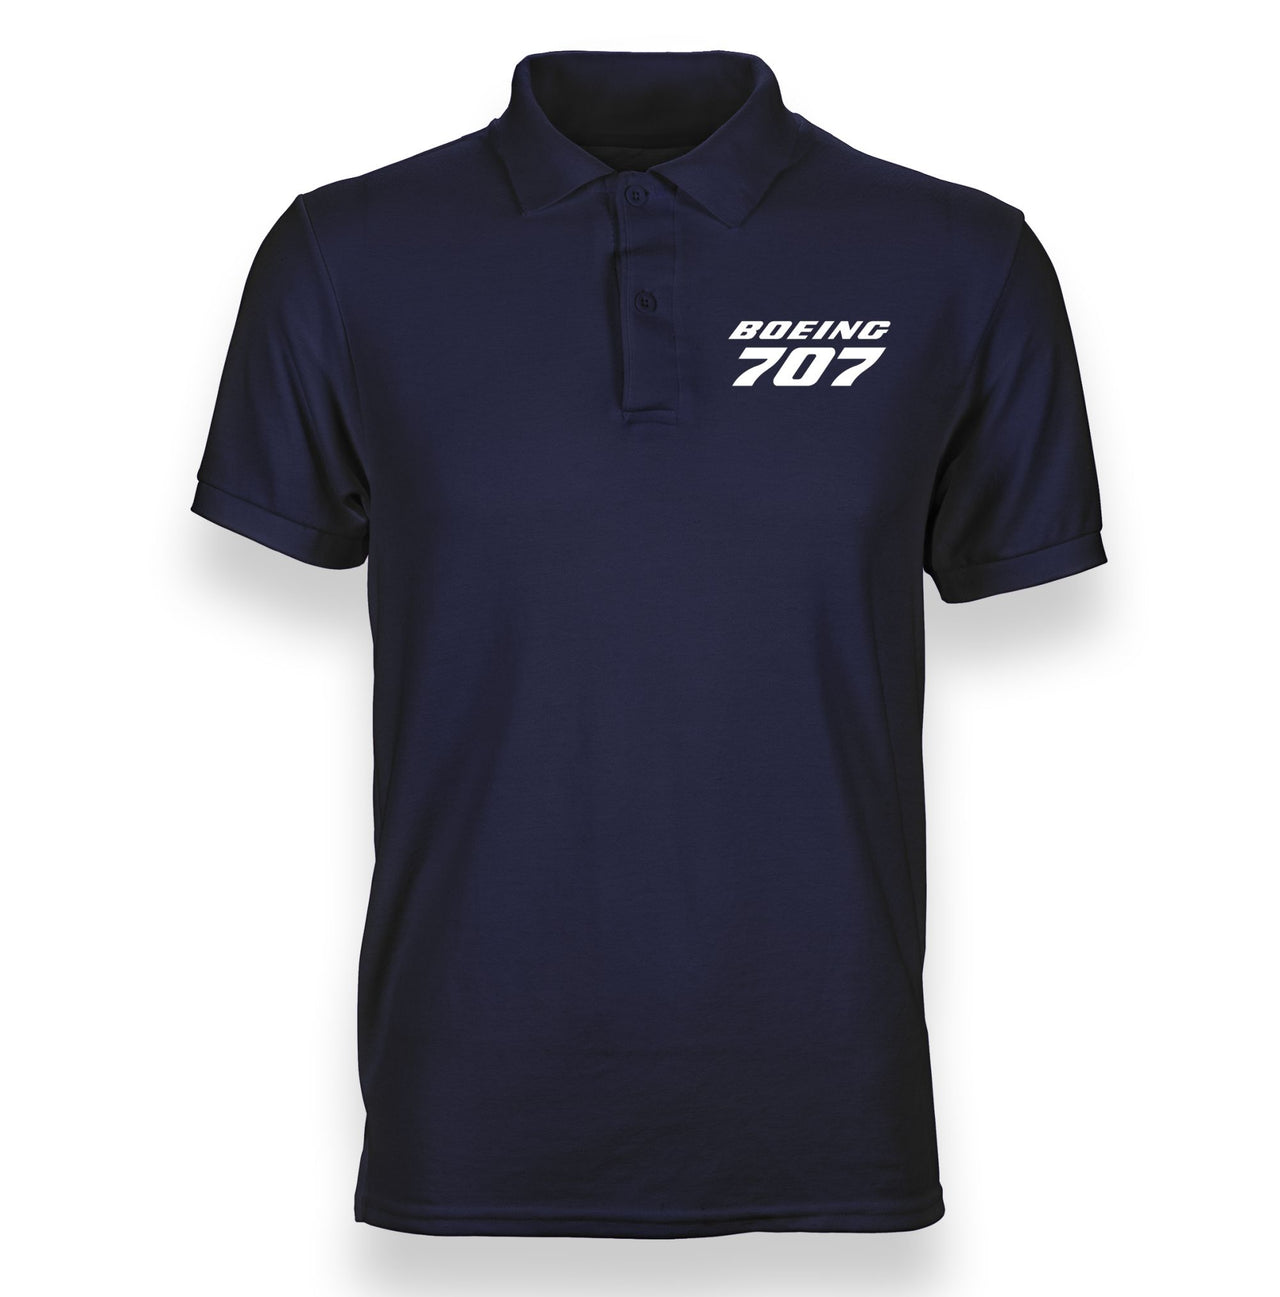 Boeing 707 & Text Designed "WOMEN" Polo T-Shirts